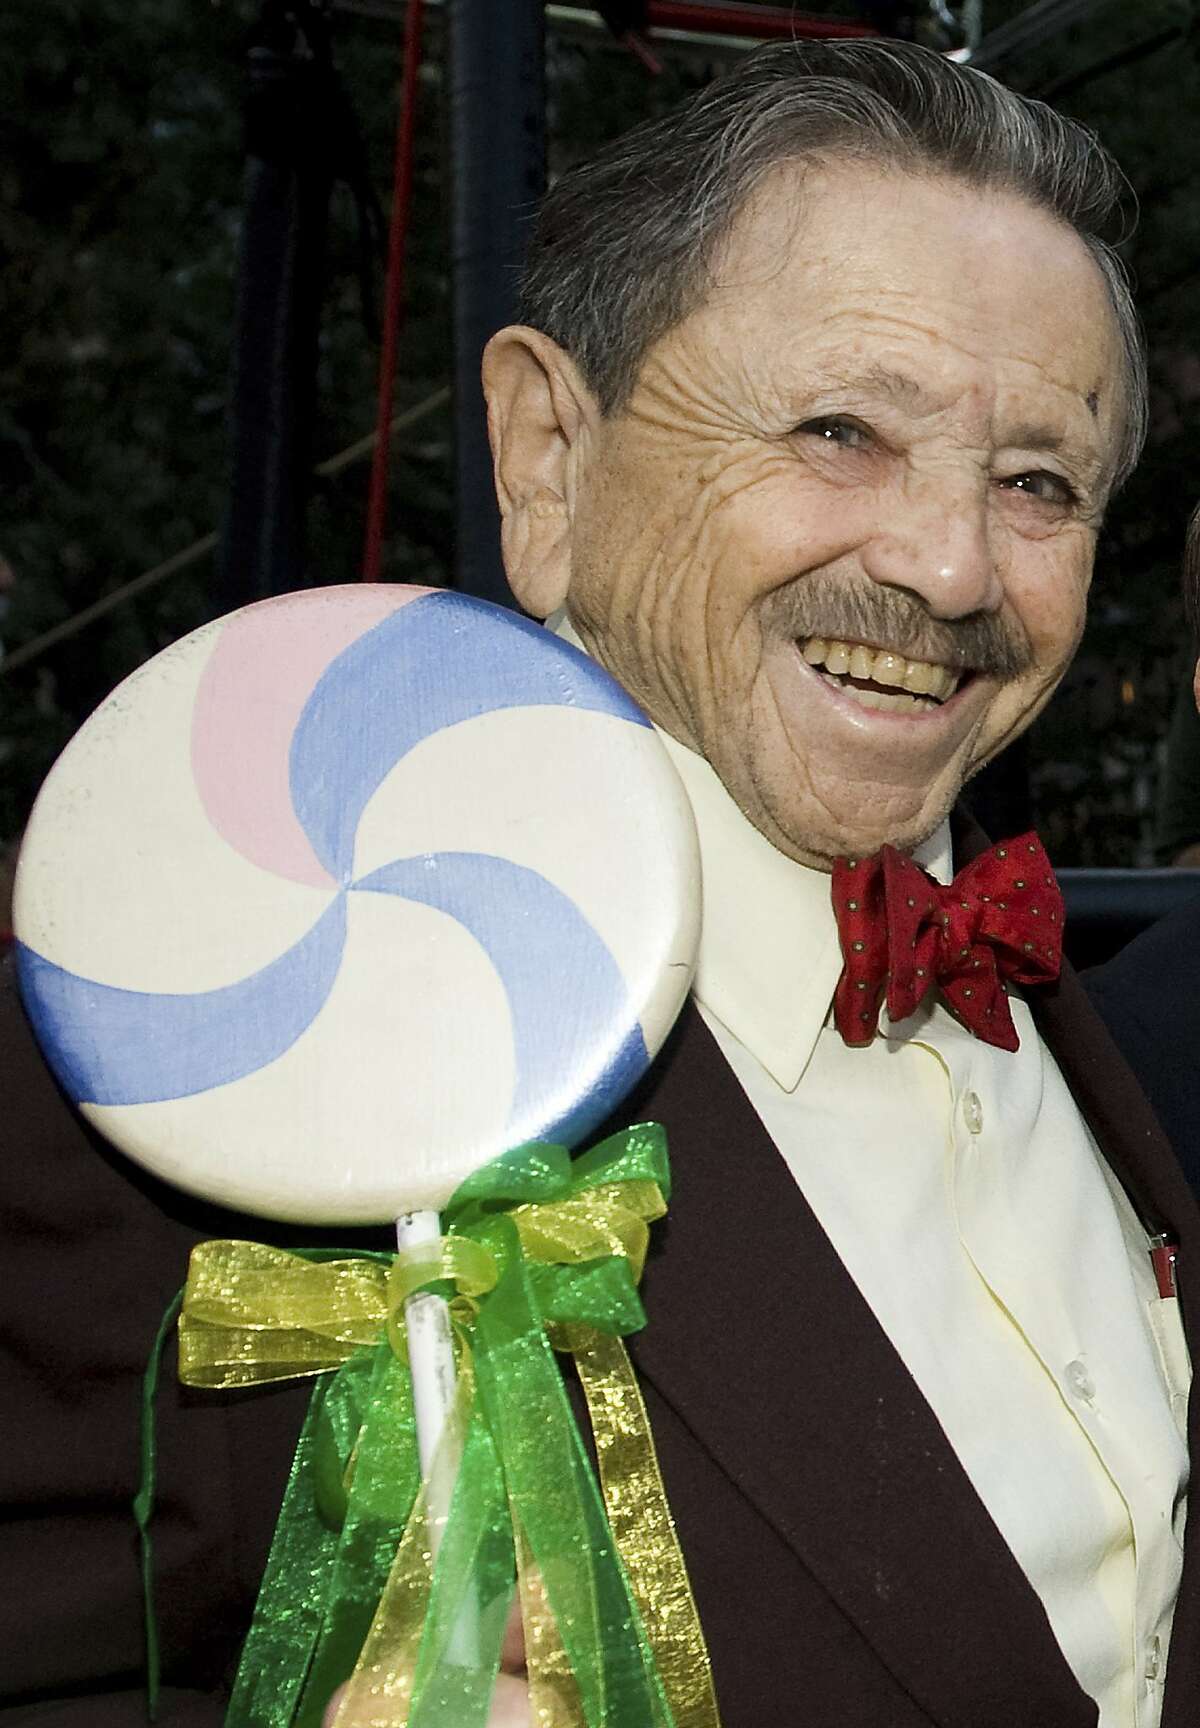 FILE - In this Sept. 24, 2009 file photo, Jerry Maren attends the "Wizard of Oz" 70th Anniversary Emerald Gala in New York. Maren, the last surviving munchkin from the classic 1939 film "The Wizard of Oz," died on May 24, 2018, at a San Diego nursing home. He was 98. (AP Photo/Charles Sykes, File)